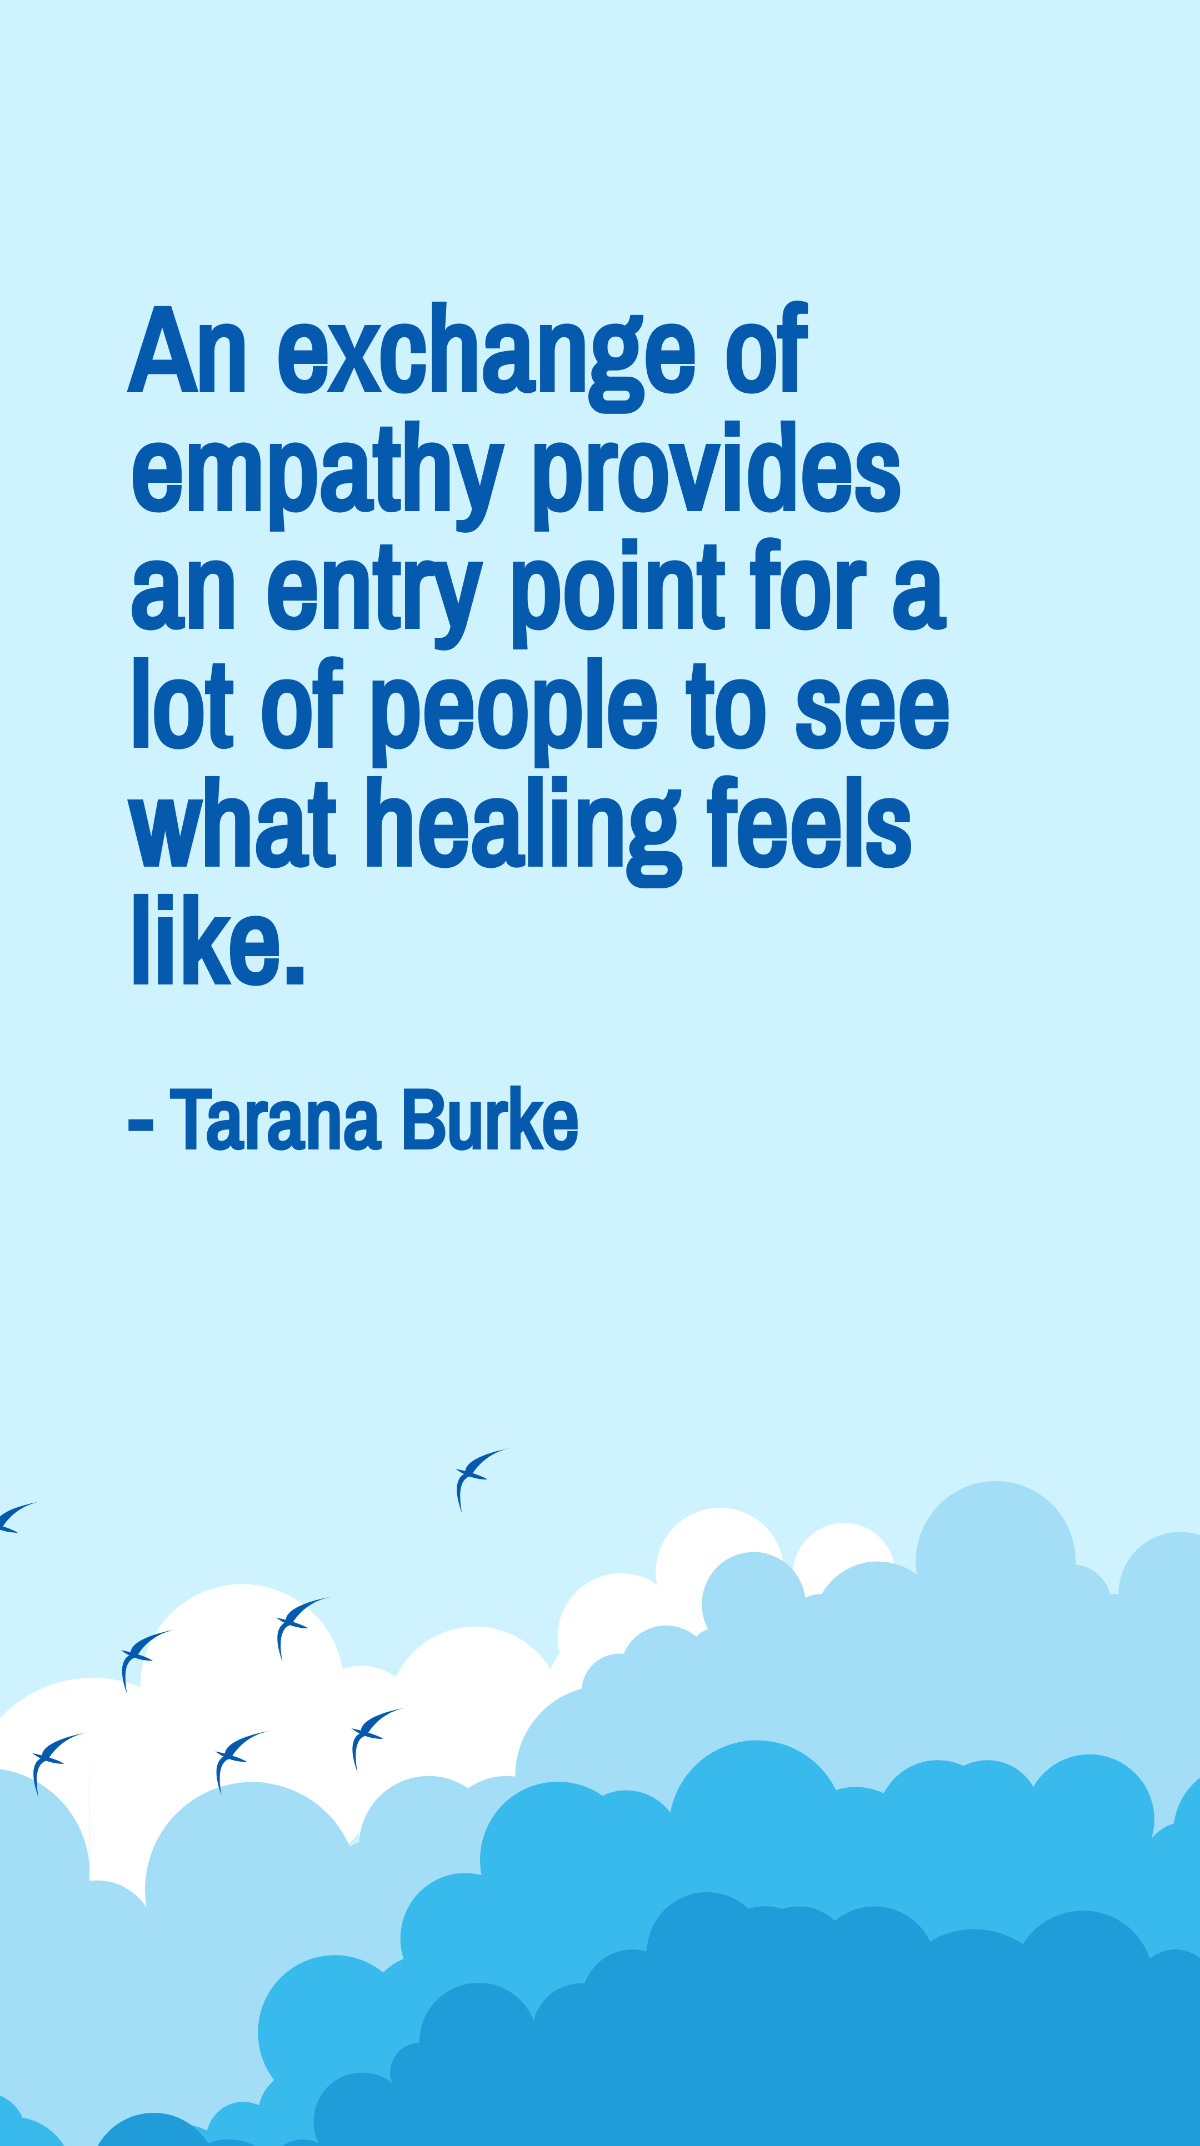 Tarana Burke - An exchange of empathy provides an entry point for a lot of people to see what healing feels like. Template